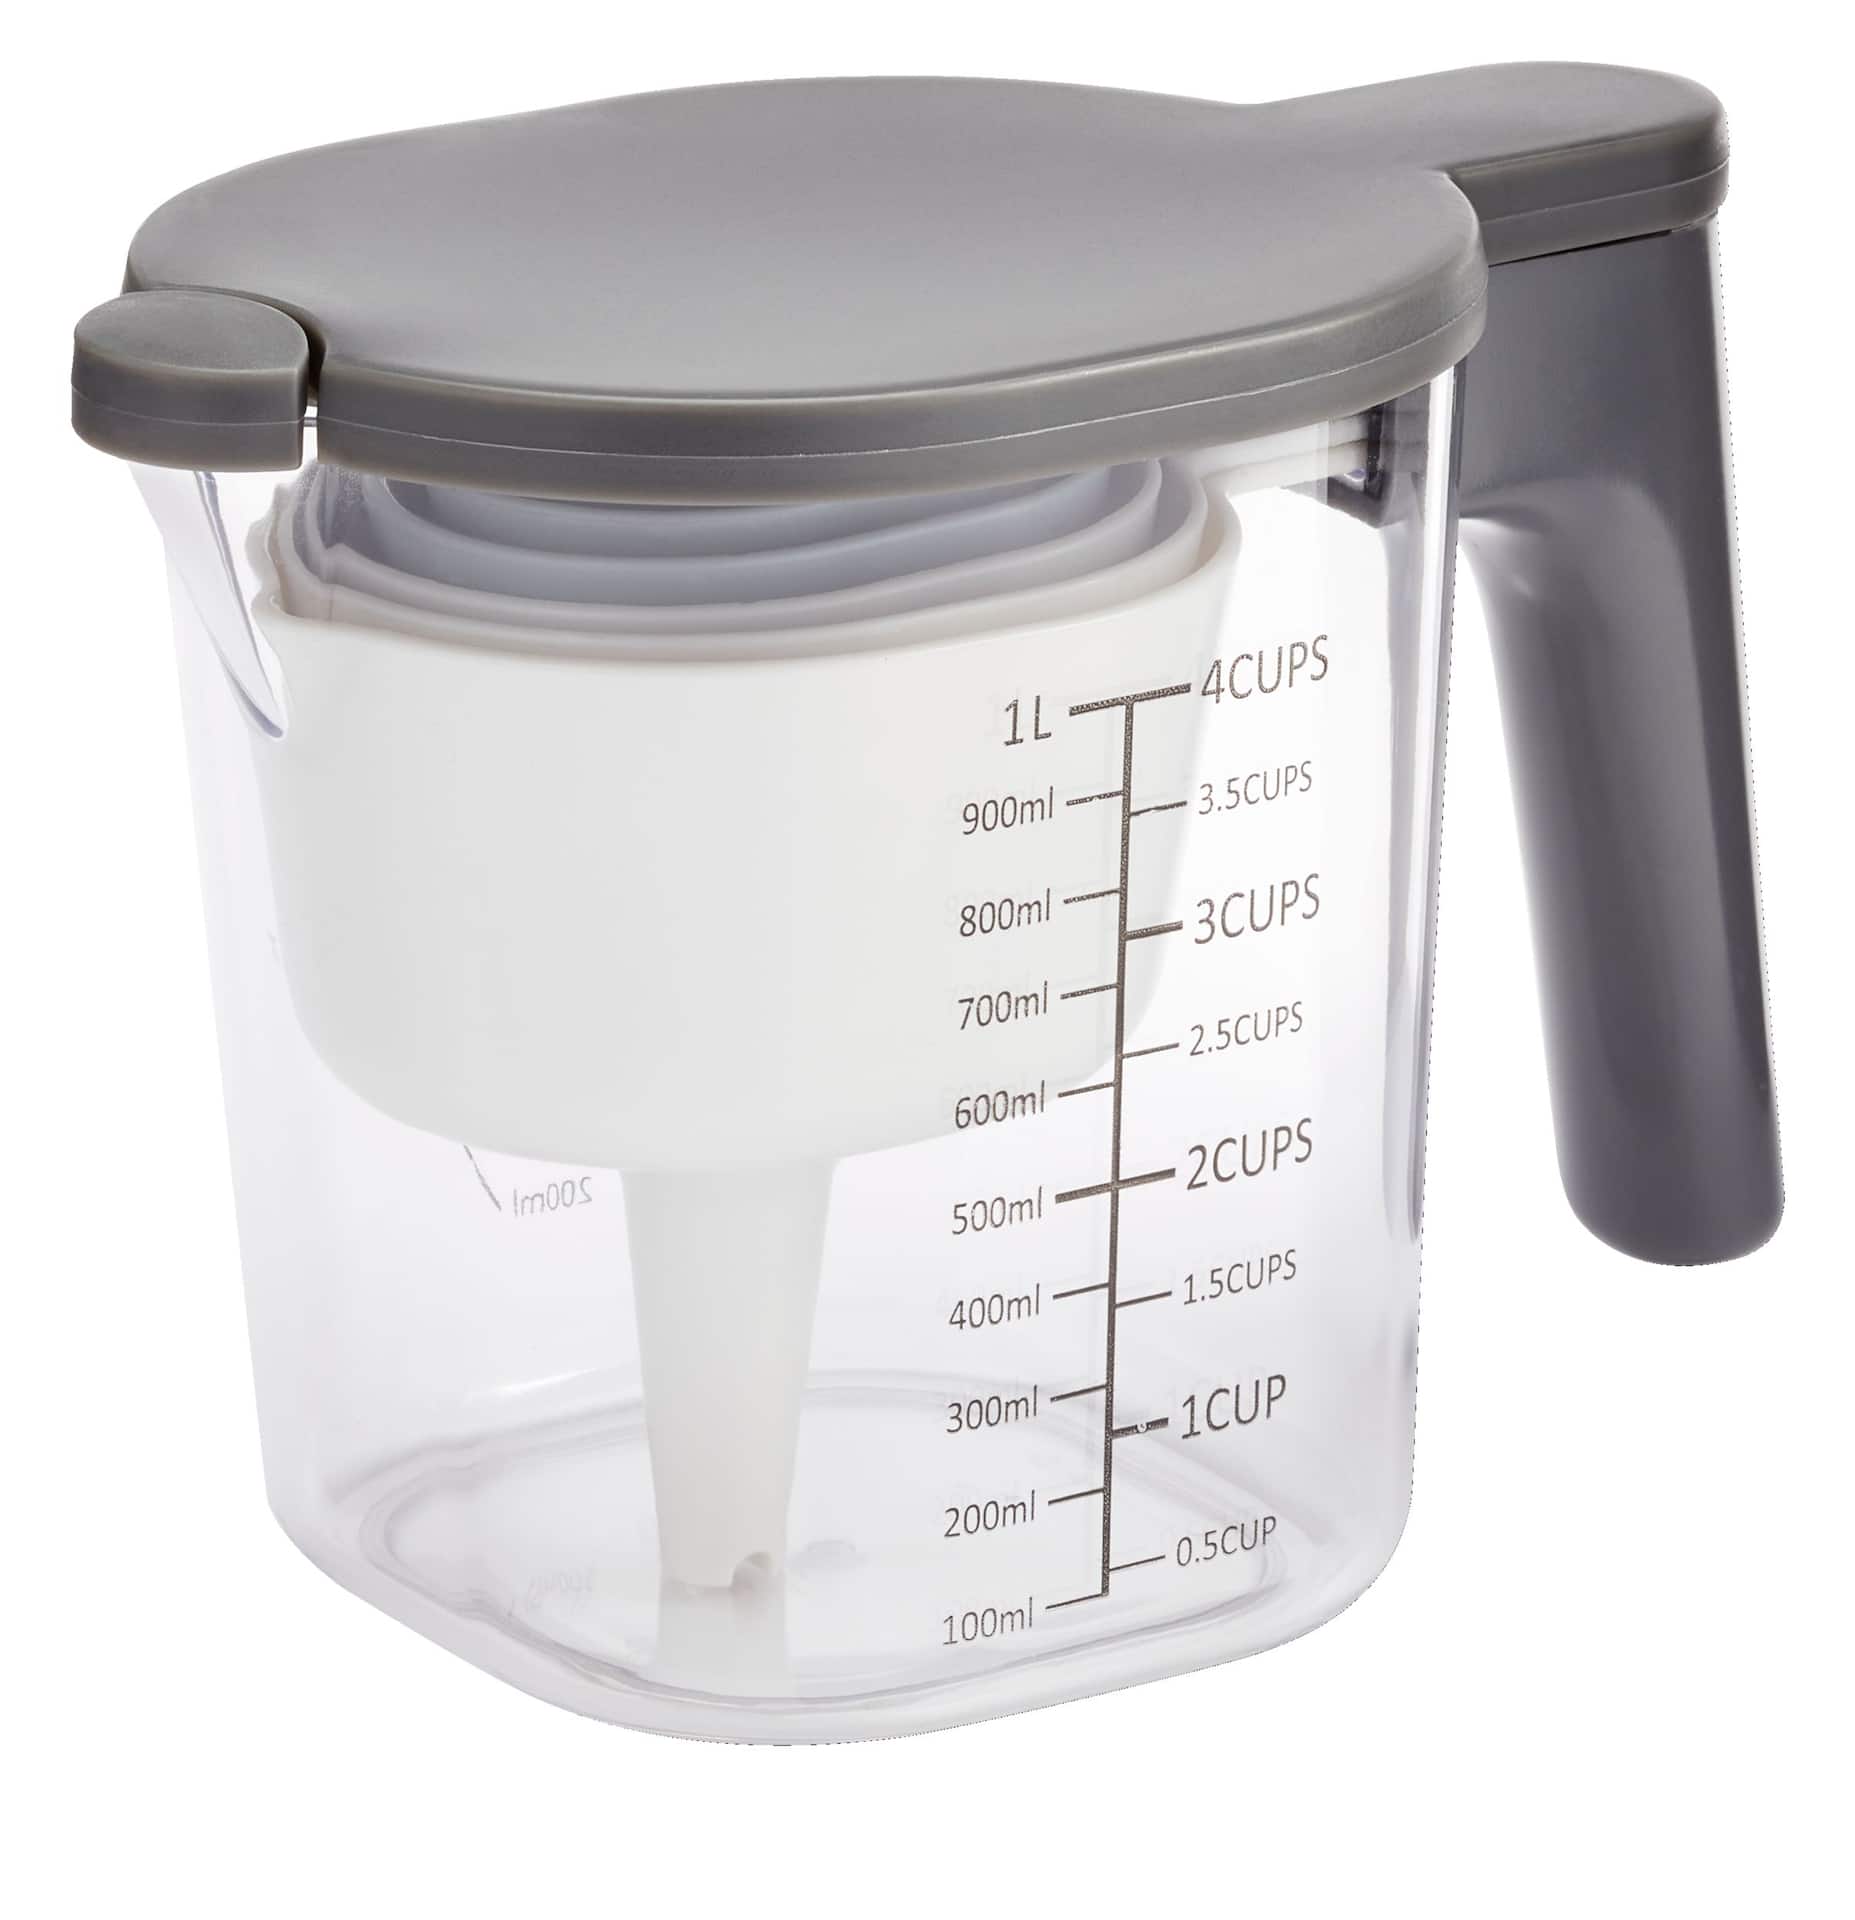 https://media-www.canadiantire.ca/product/living/kitchen/bakeware-baking-prep/1429676/master-chef-10pc-measuring-cup-set-73c761cb-c28c-42fe-a32e-f57a30c6b9a6-jpgrendition.jpg